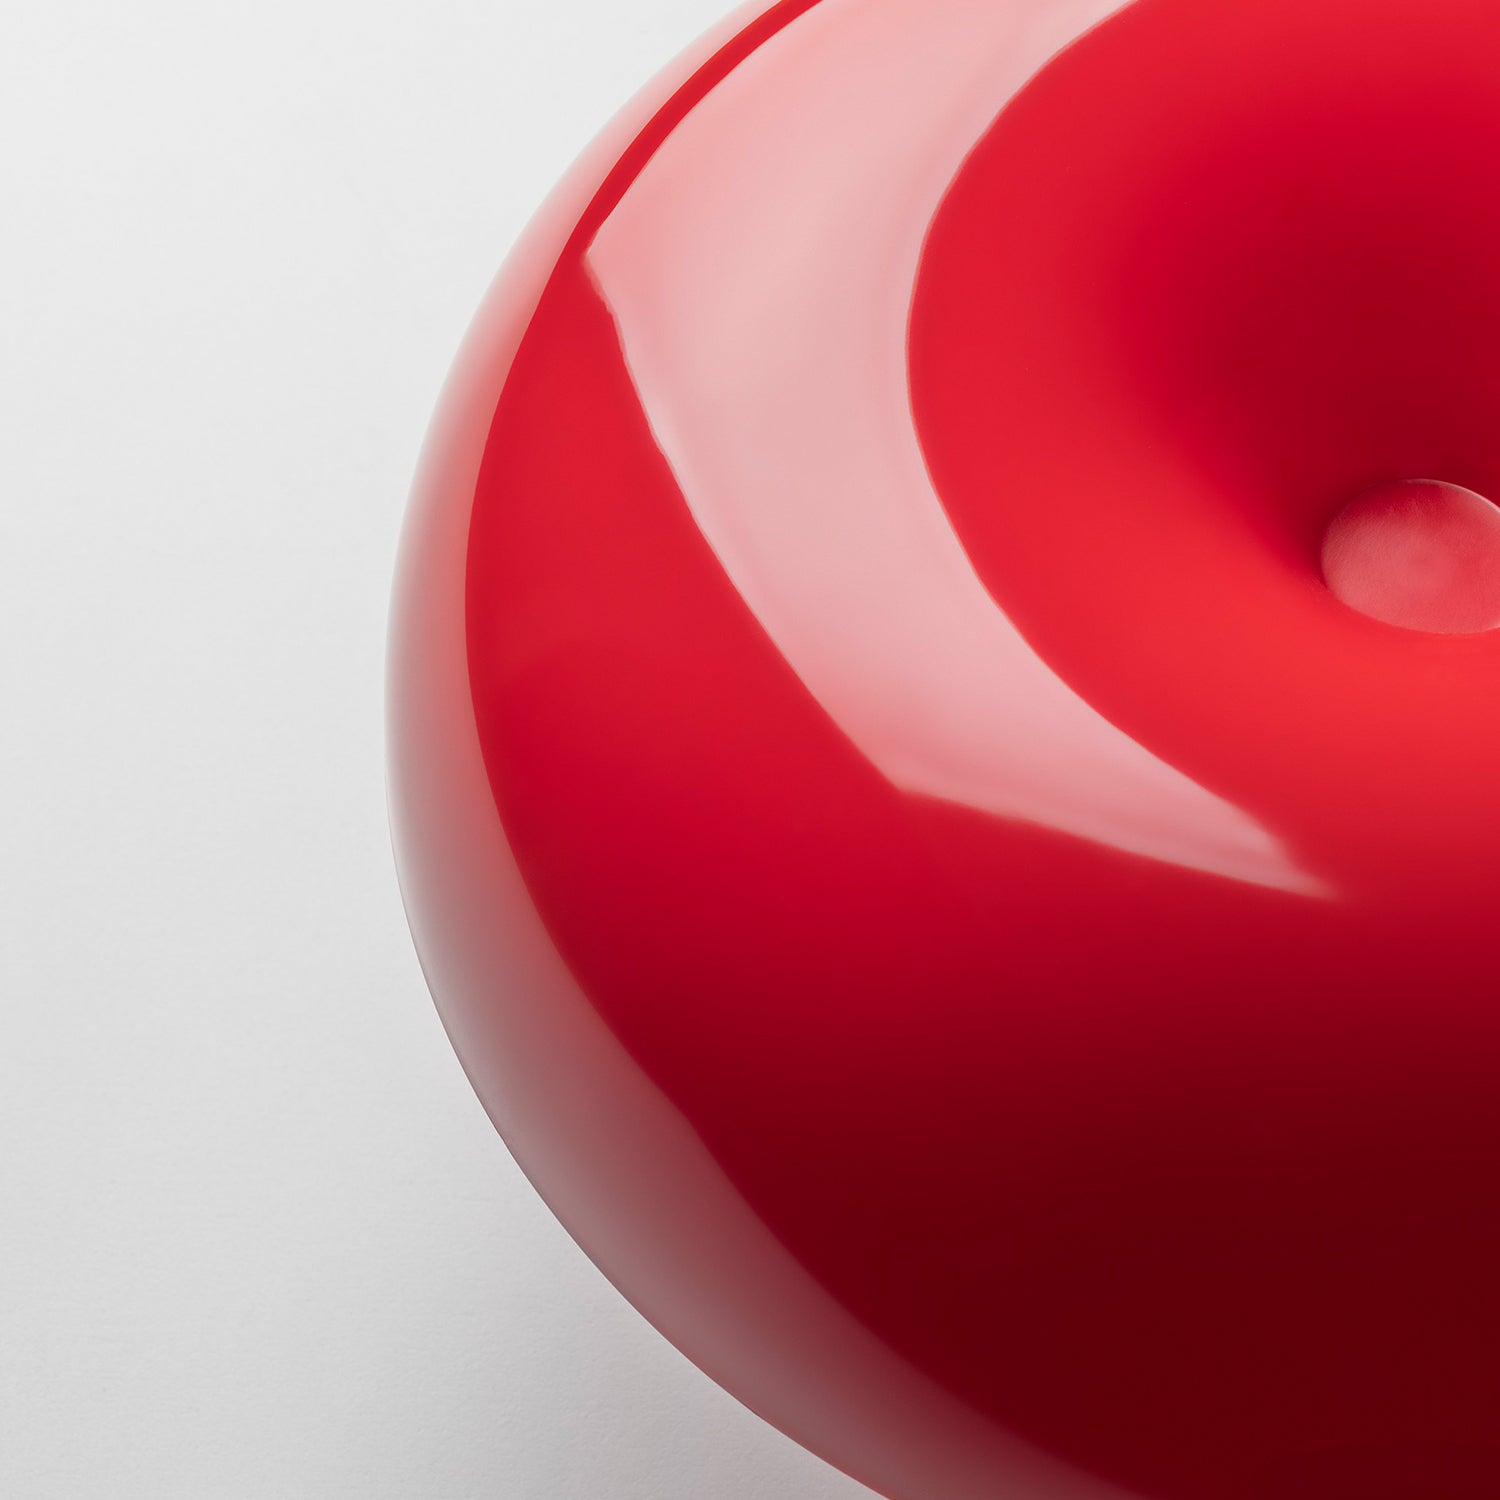 Detail image of Artemide Nessino Table Lamp in Red